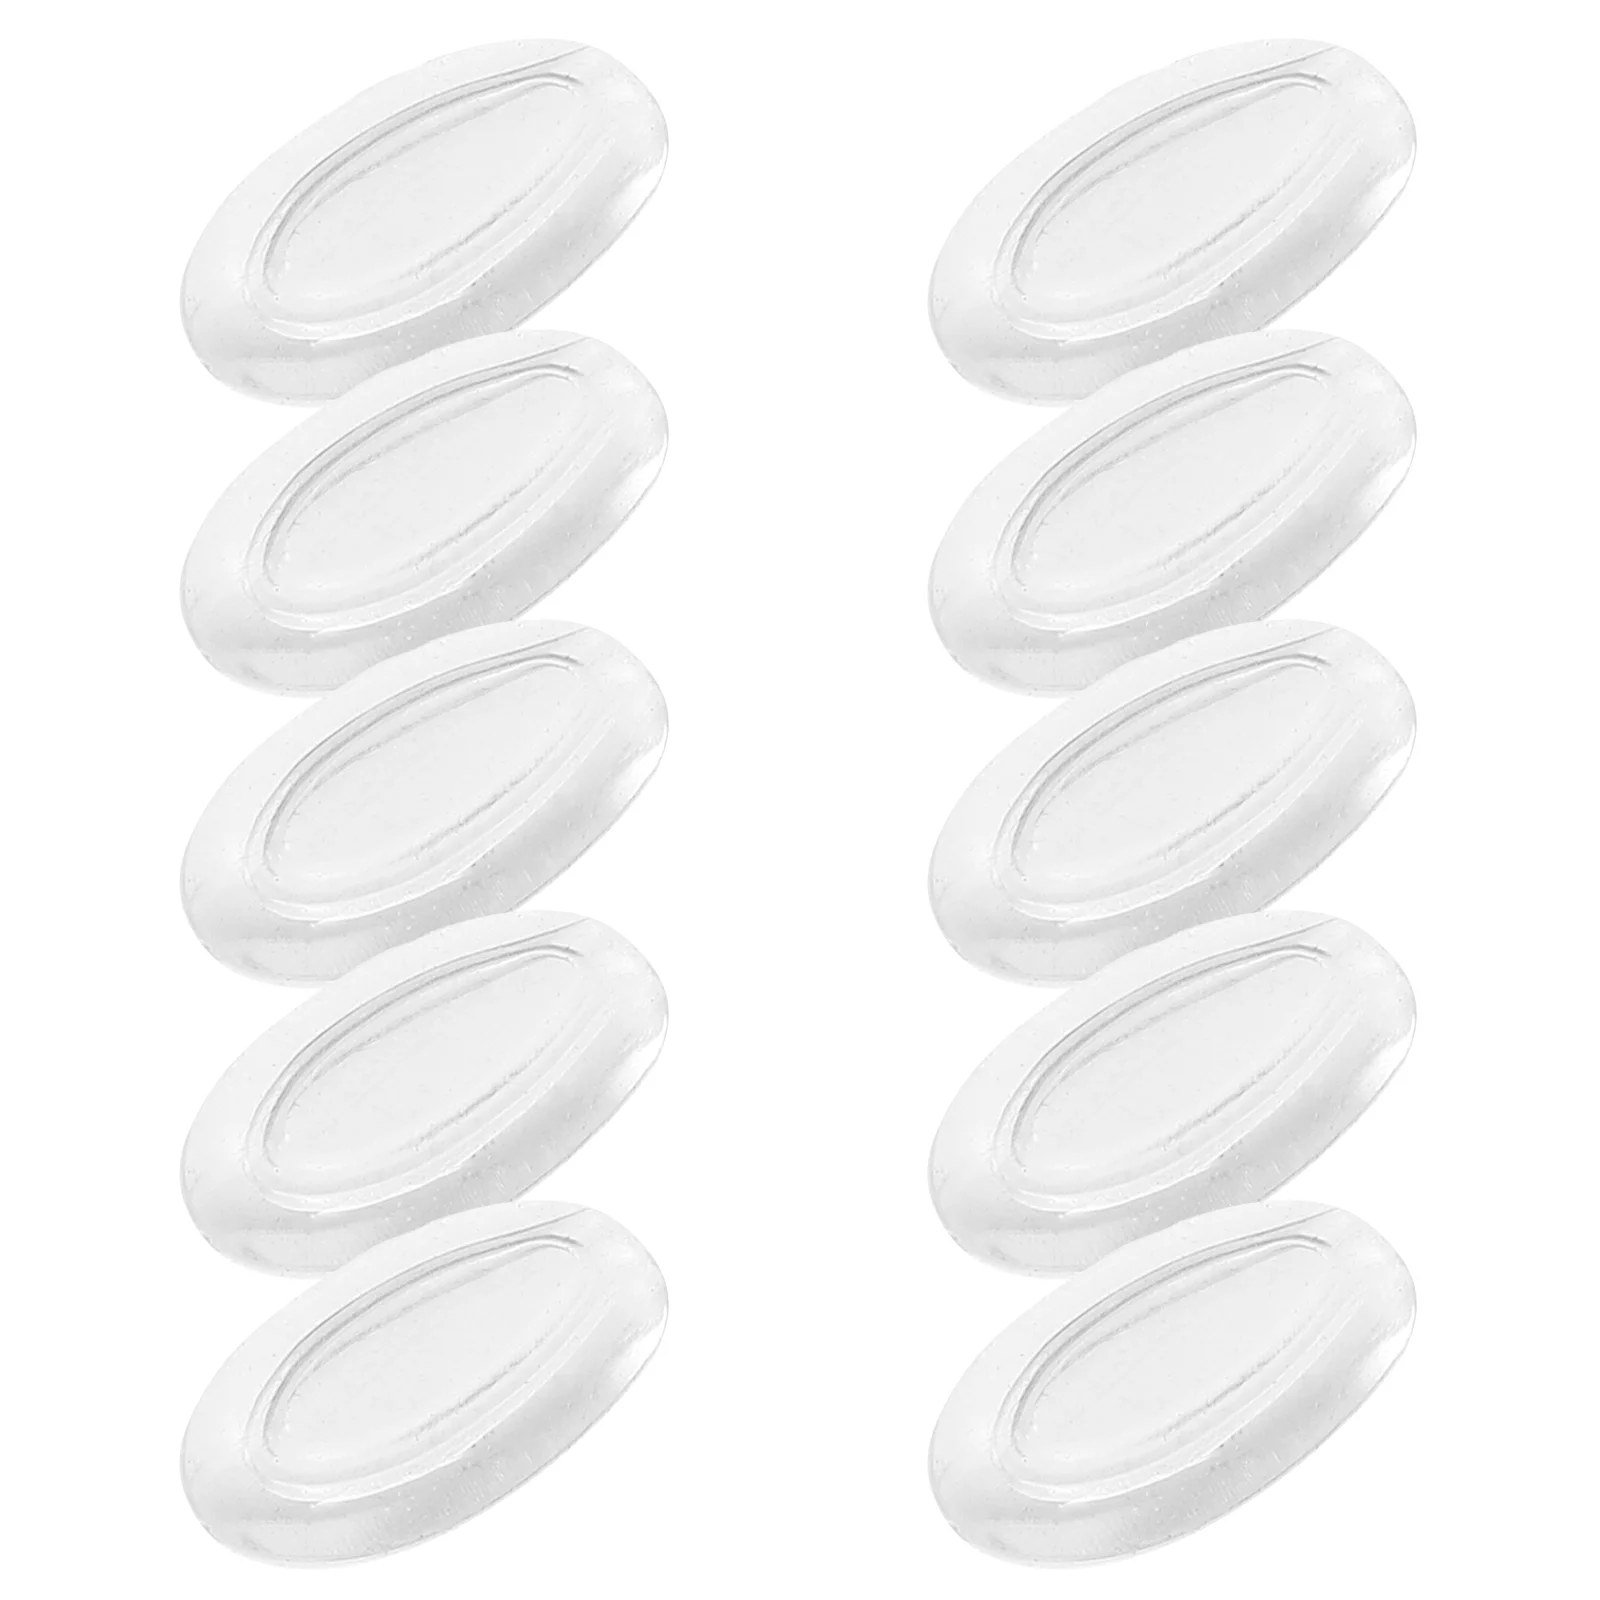 

10 Pairs Glasses Nose Pads Cushion Eye Replacement for Silica Gel Eyeglass Accessories Your Support Repair Kit Parts